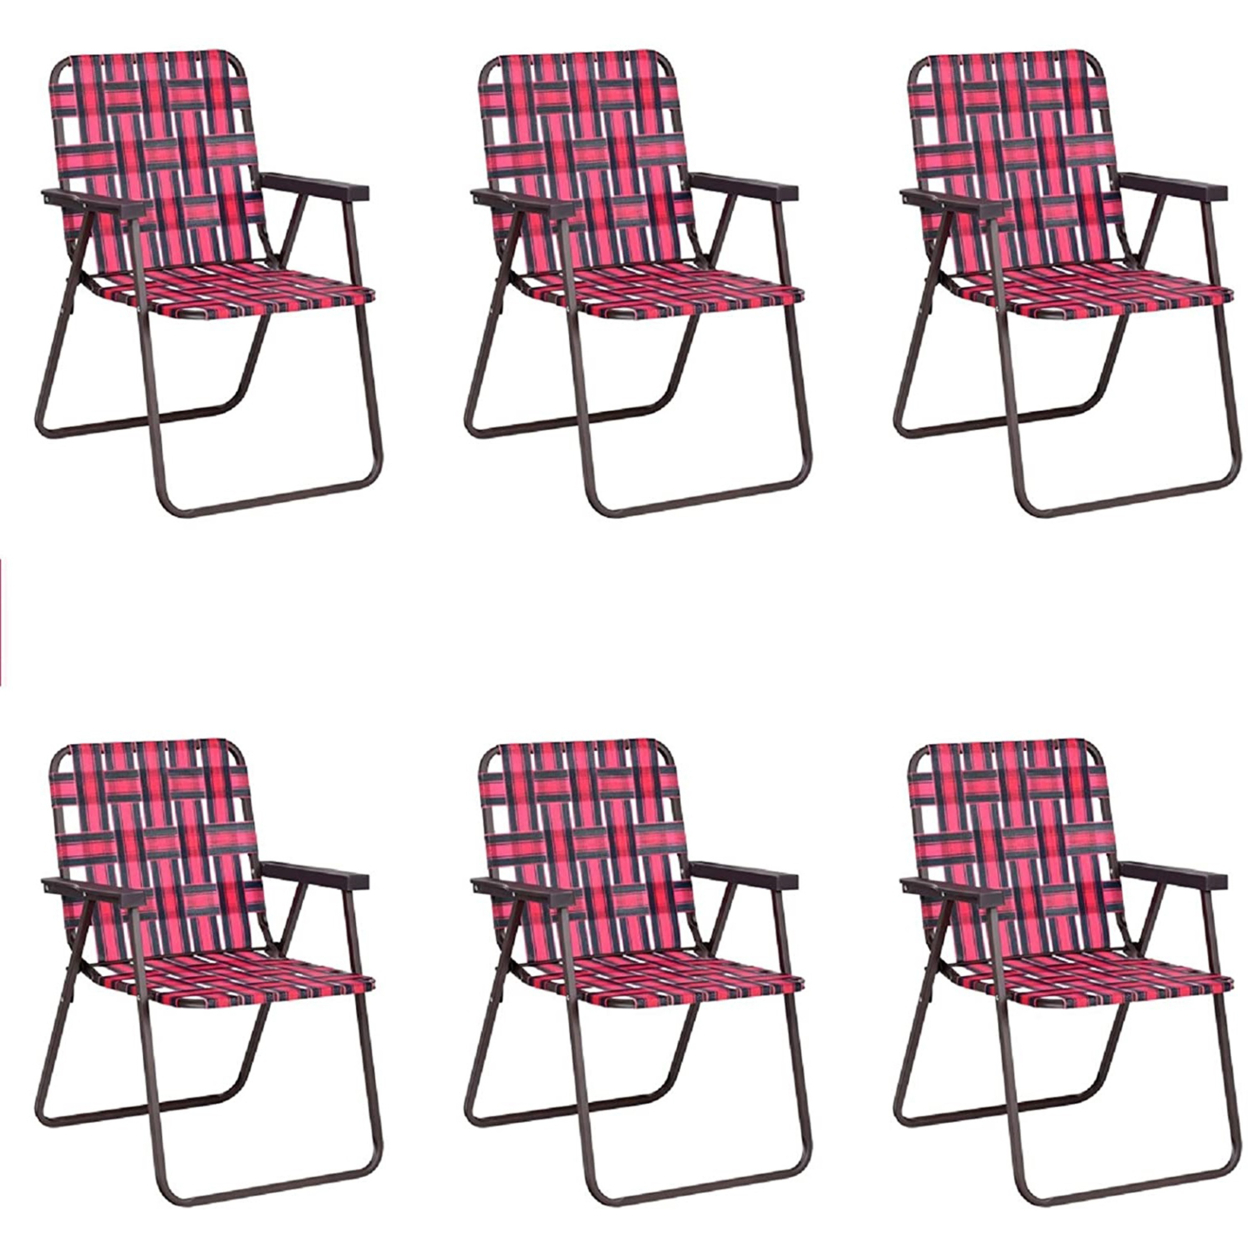 Set Of 6 Patio Folding Web Chair Set Portable Beach Camping Chair - Red